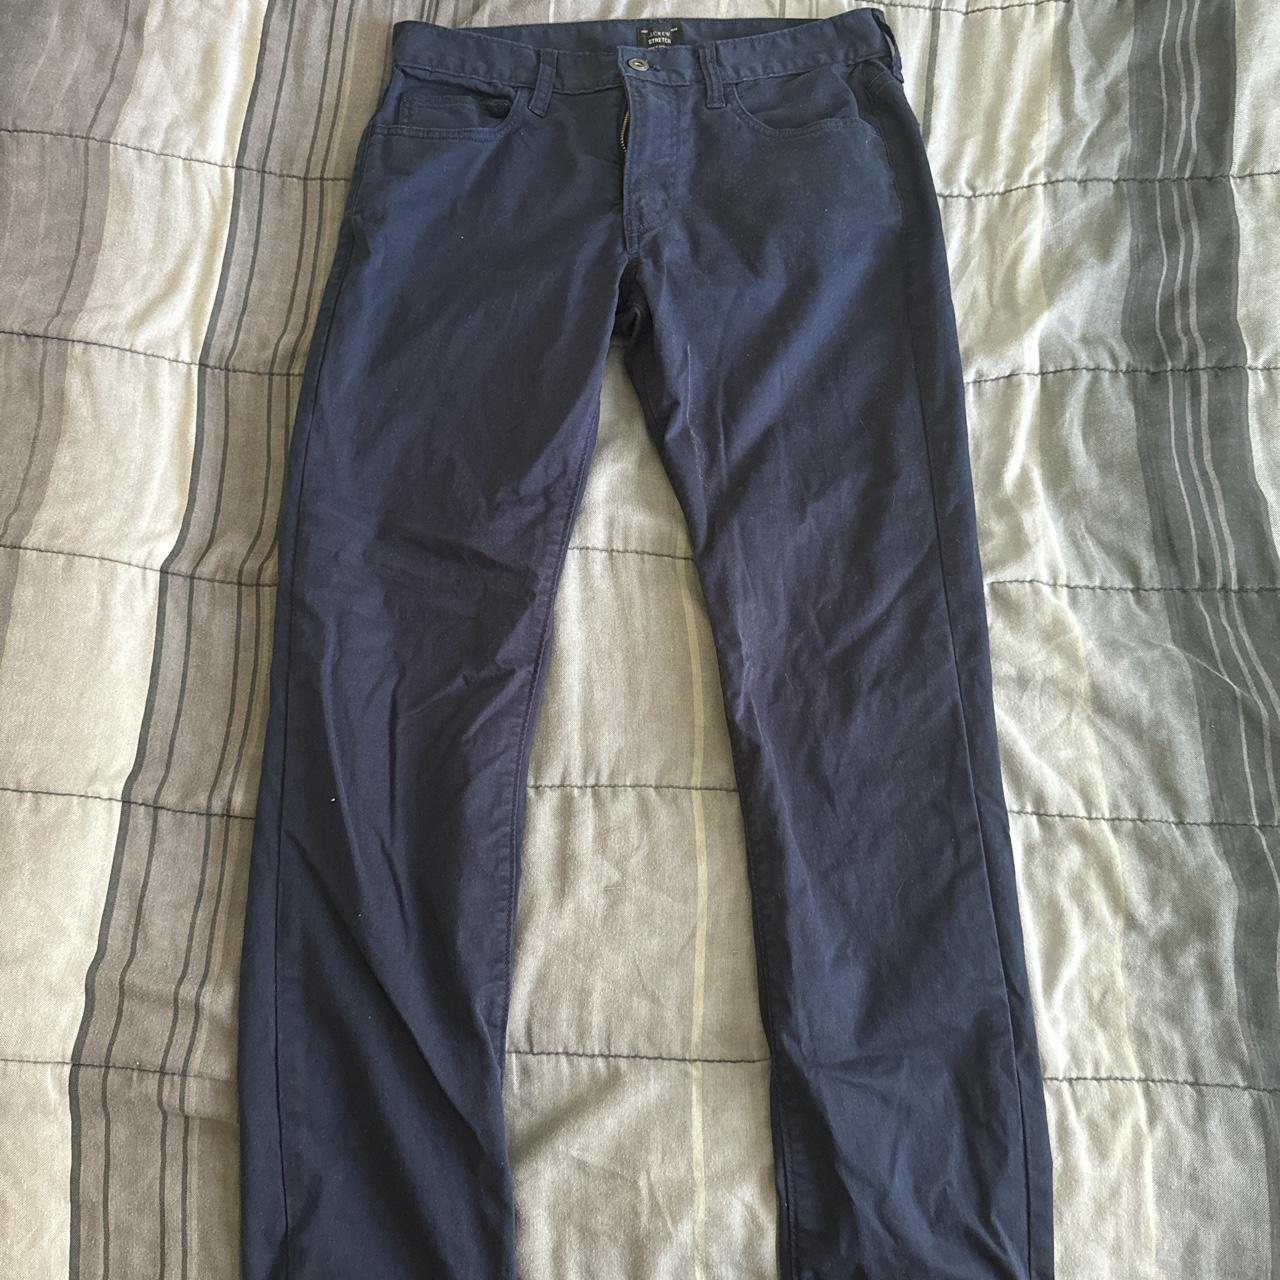 Crewcuts by J.Crew Men's Navy and Blue Trousers